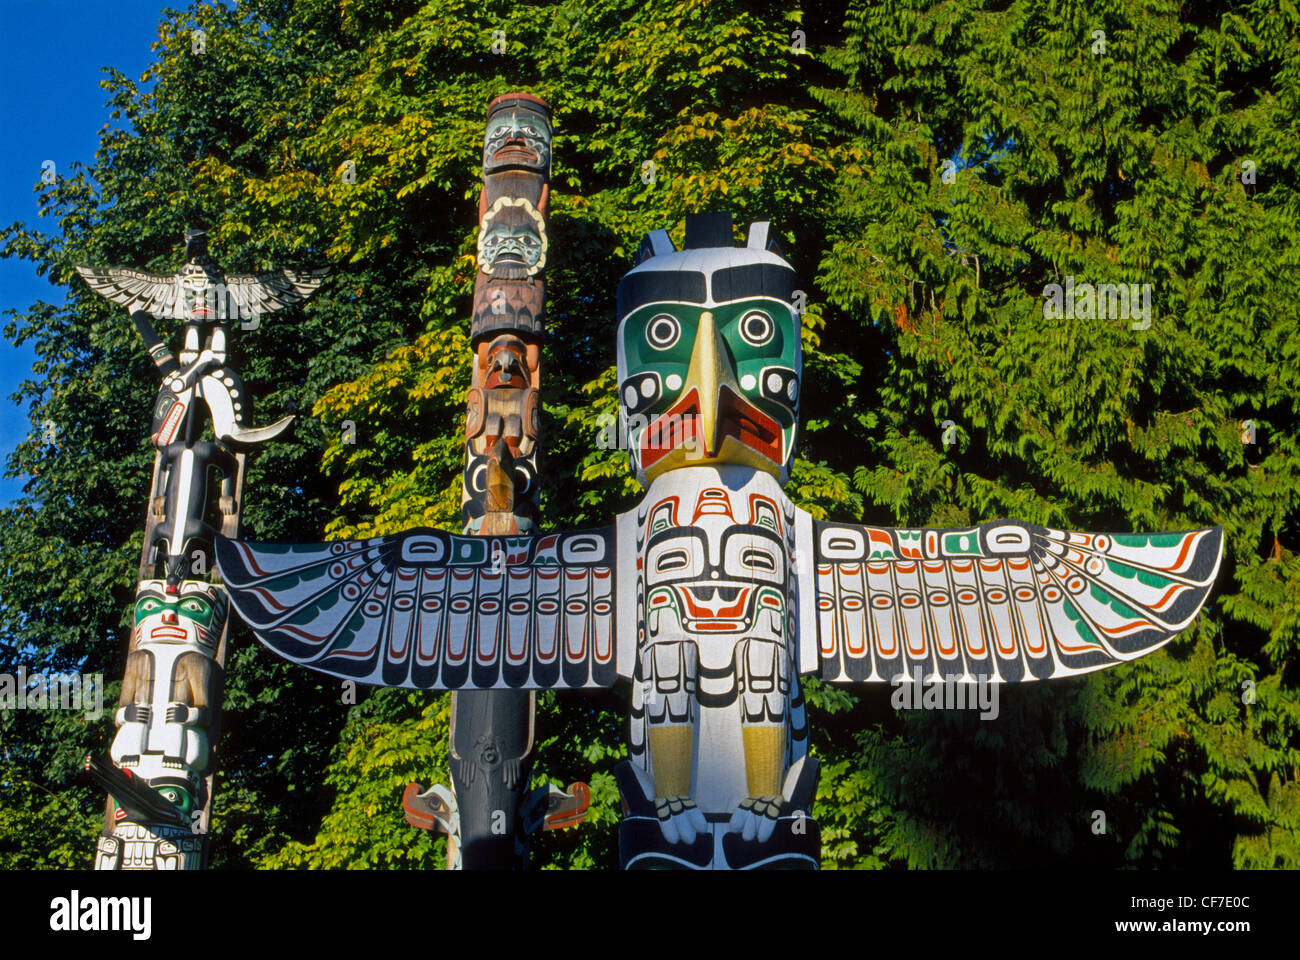 Figures and symbols of importance to First Nation peoples are carved into colorful wooden totem poles displayed in Vancouver, British Columbia, Canada. Stock Photo